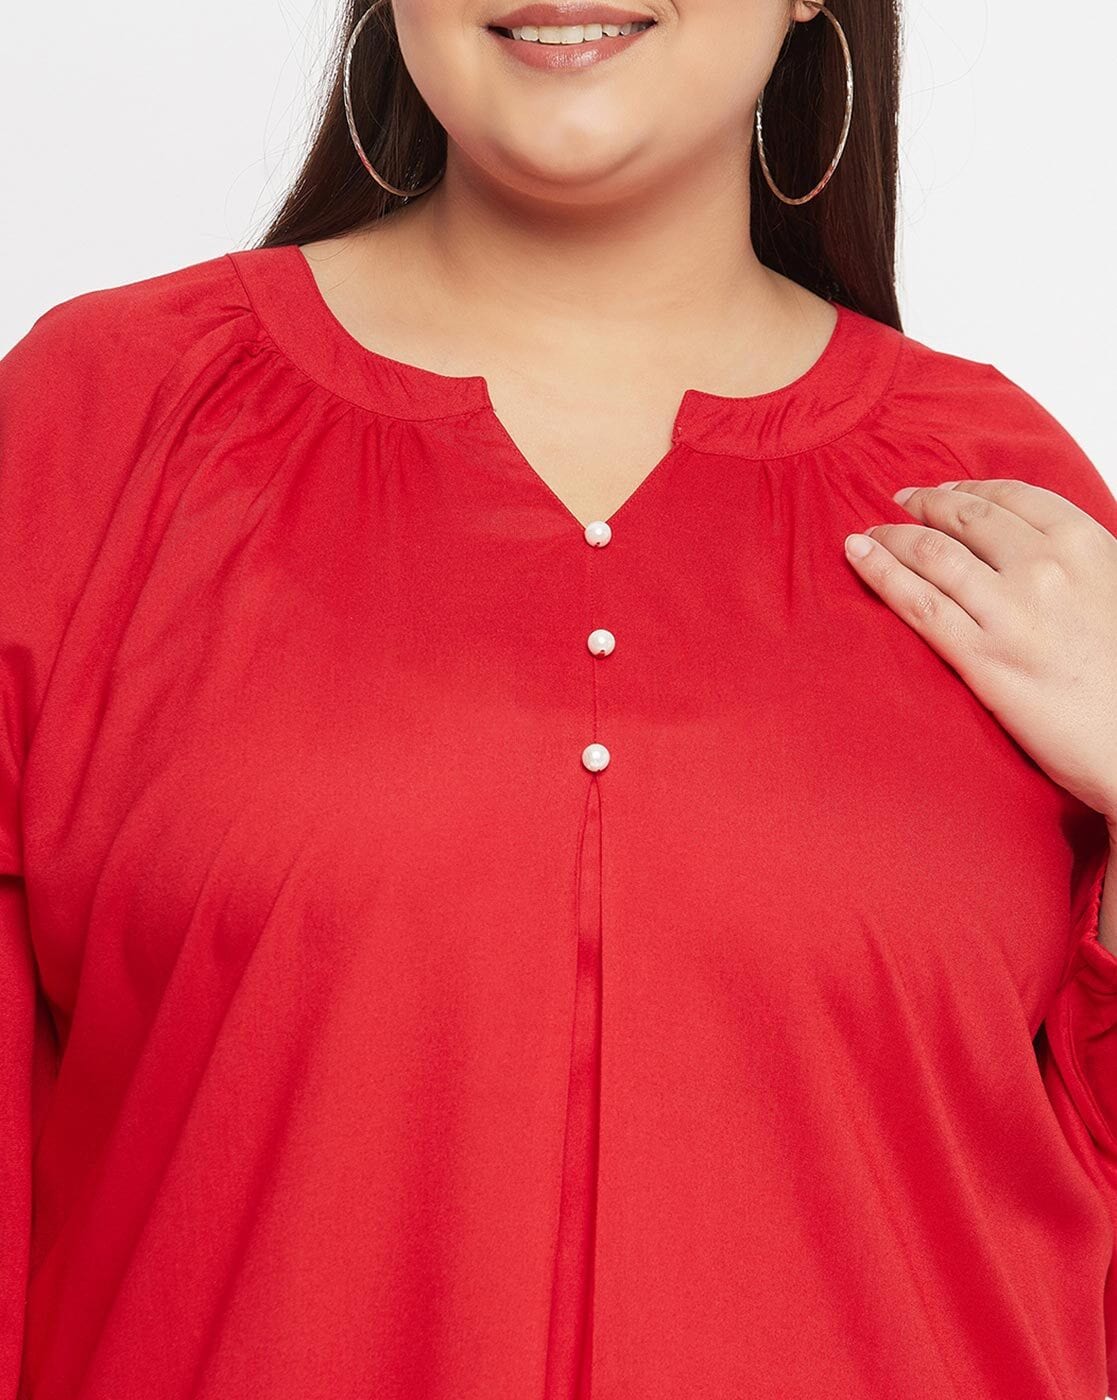 Plus Size Tops For Women 4X V Neck Tee Shirts Colorblock Tunics Wine Red 28W